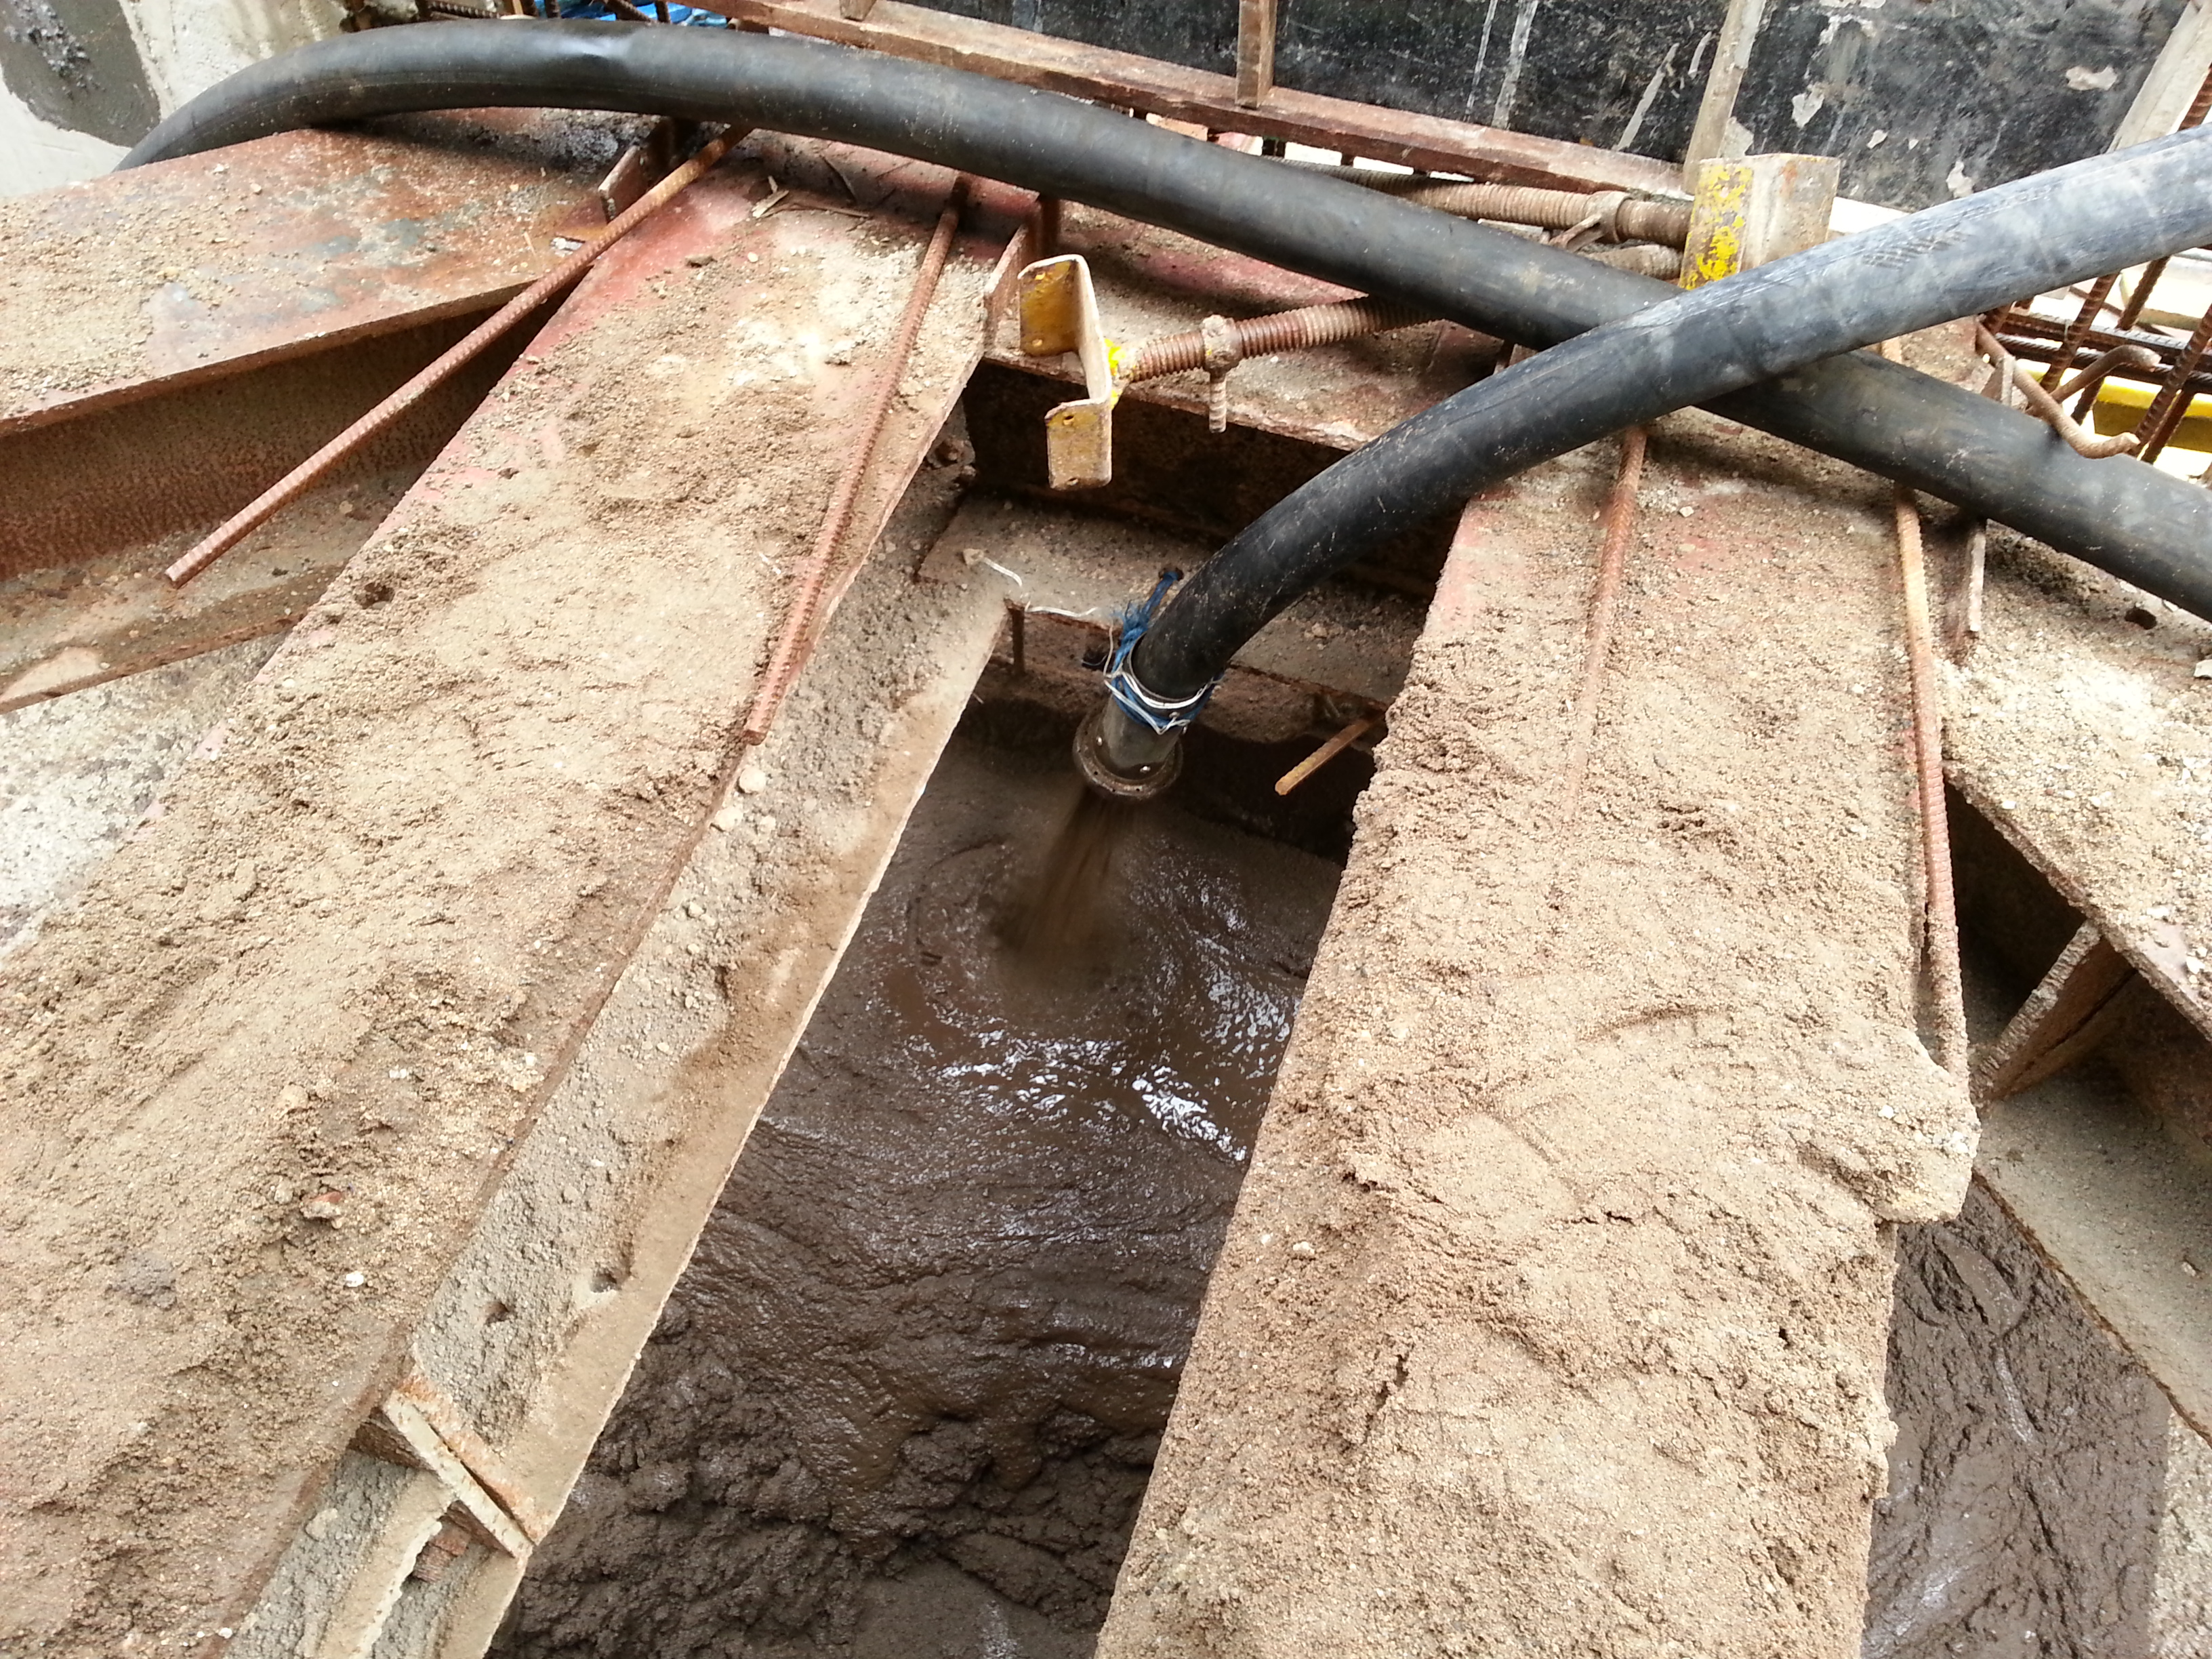 MM VSE 500 Sand/Screed Pump at Singapore Residential Project